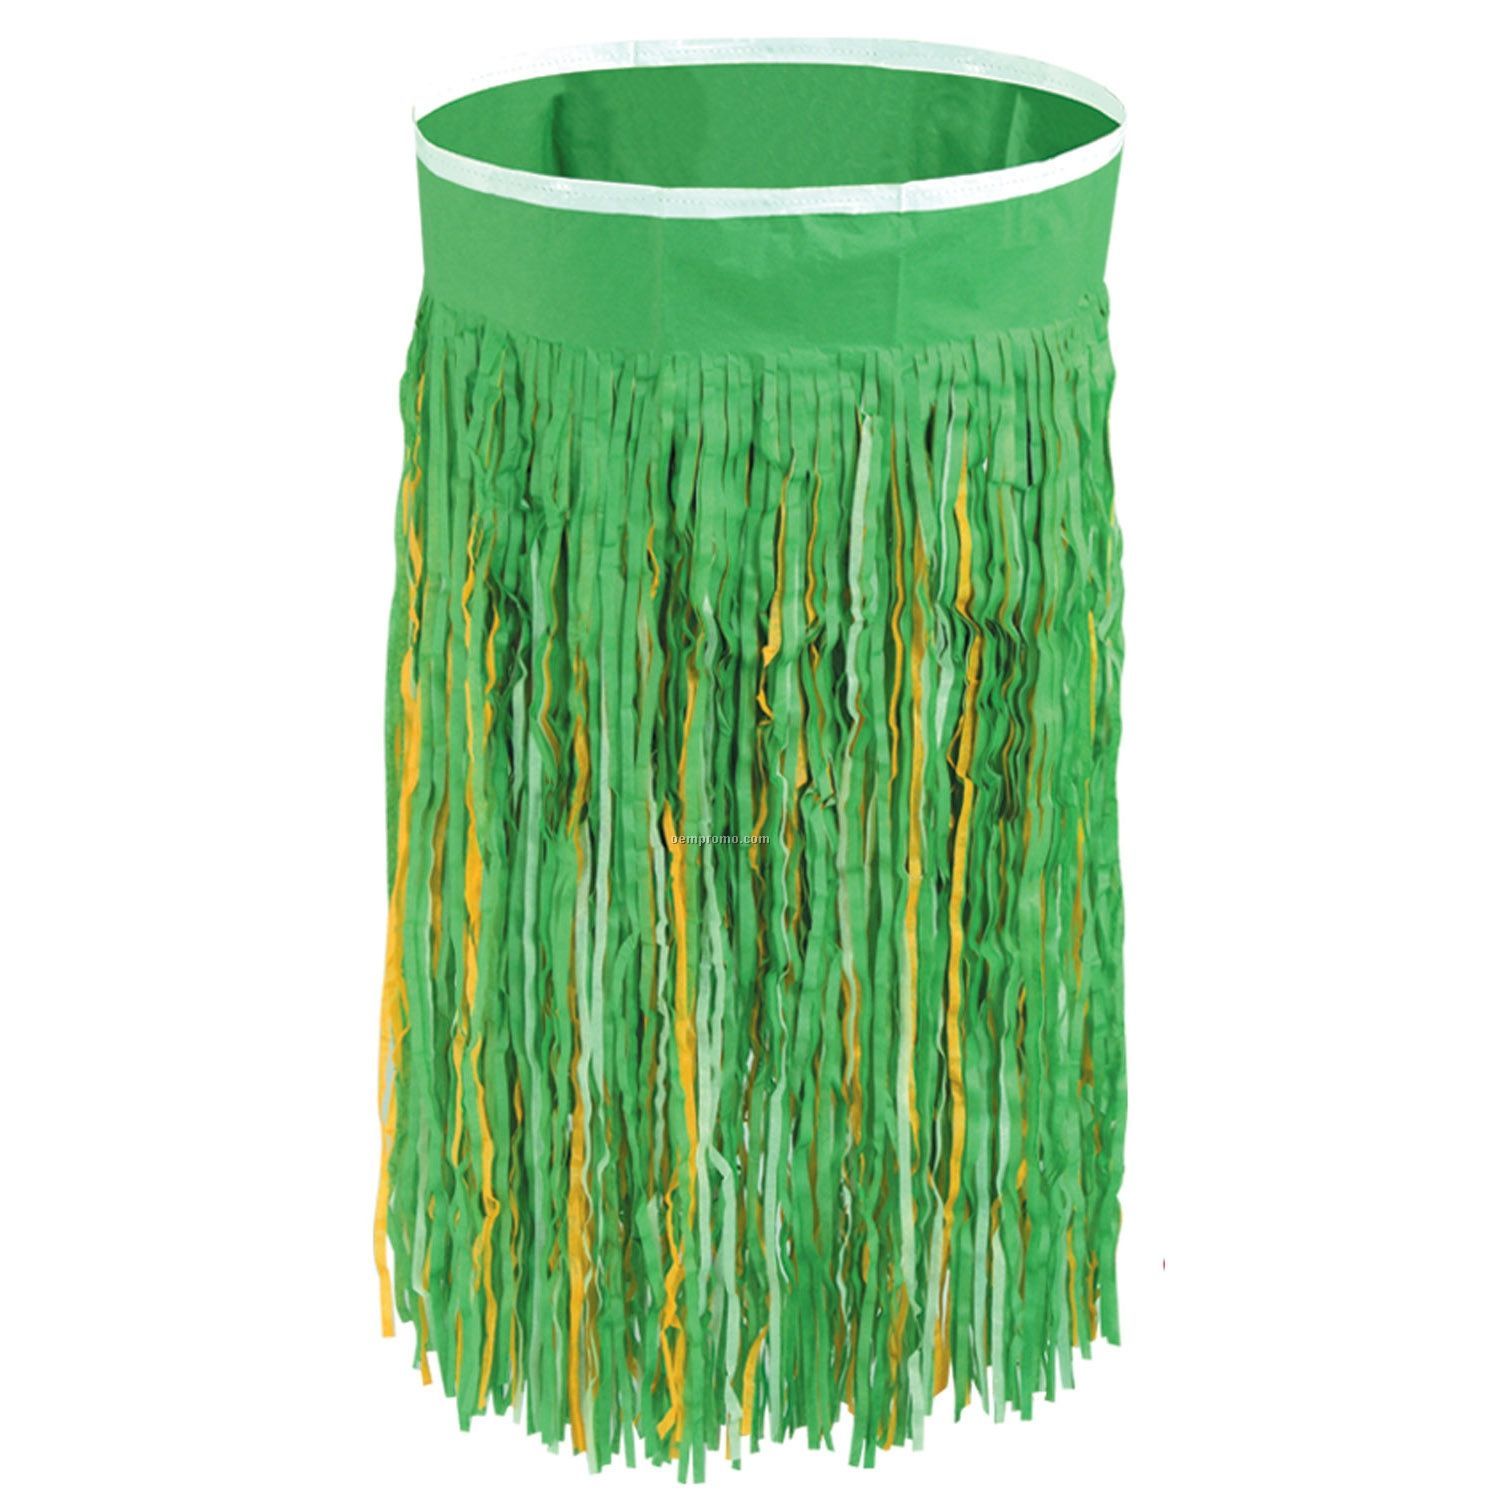 Assorted 6 Ply Flame Resistant Tissue Hula Skirt